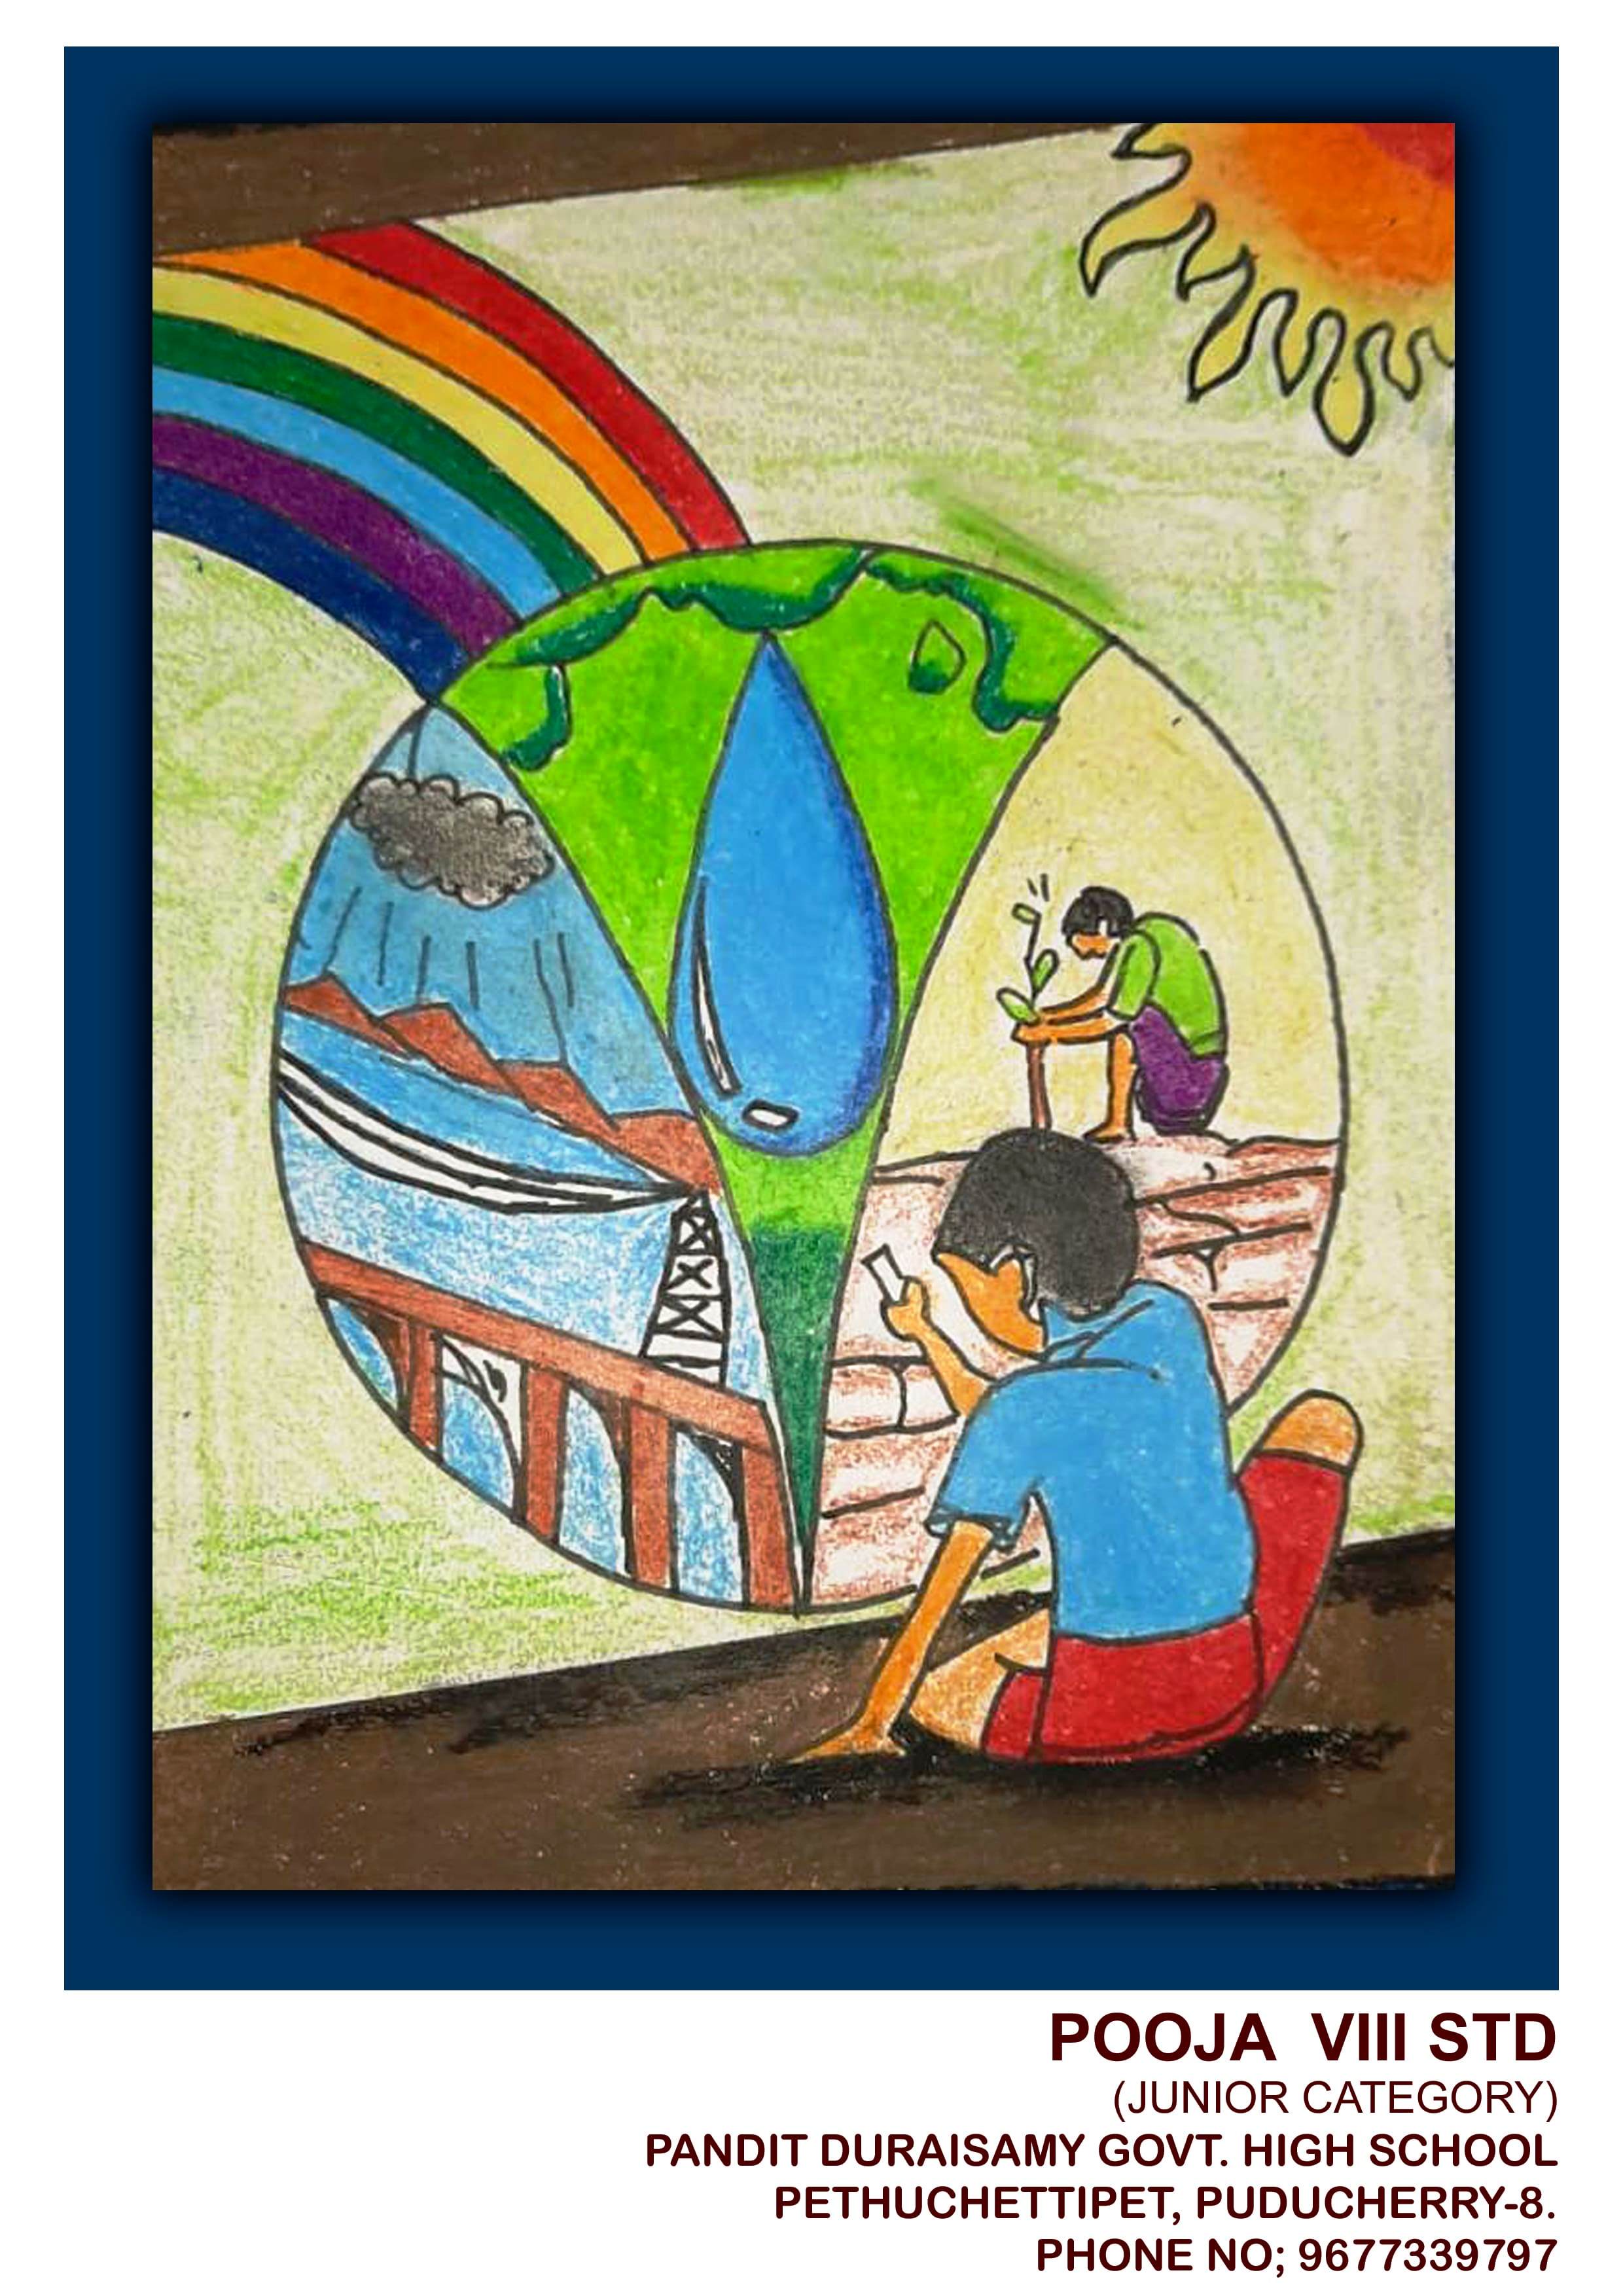 environment day drawing||save world from pollution poster painting - YouTube